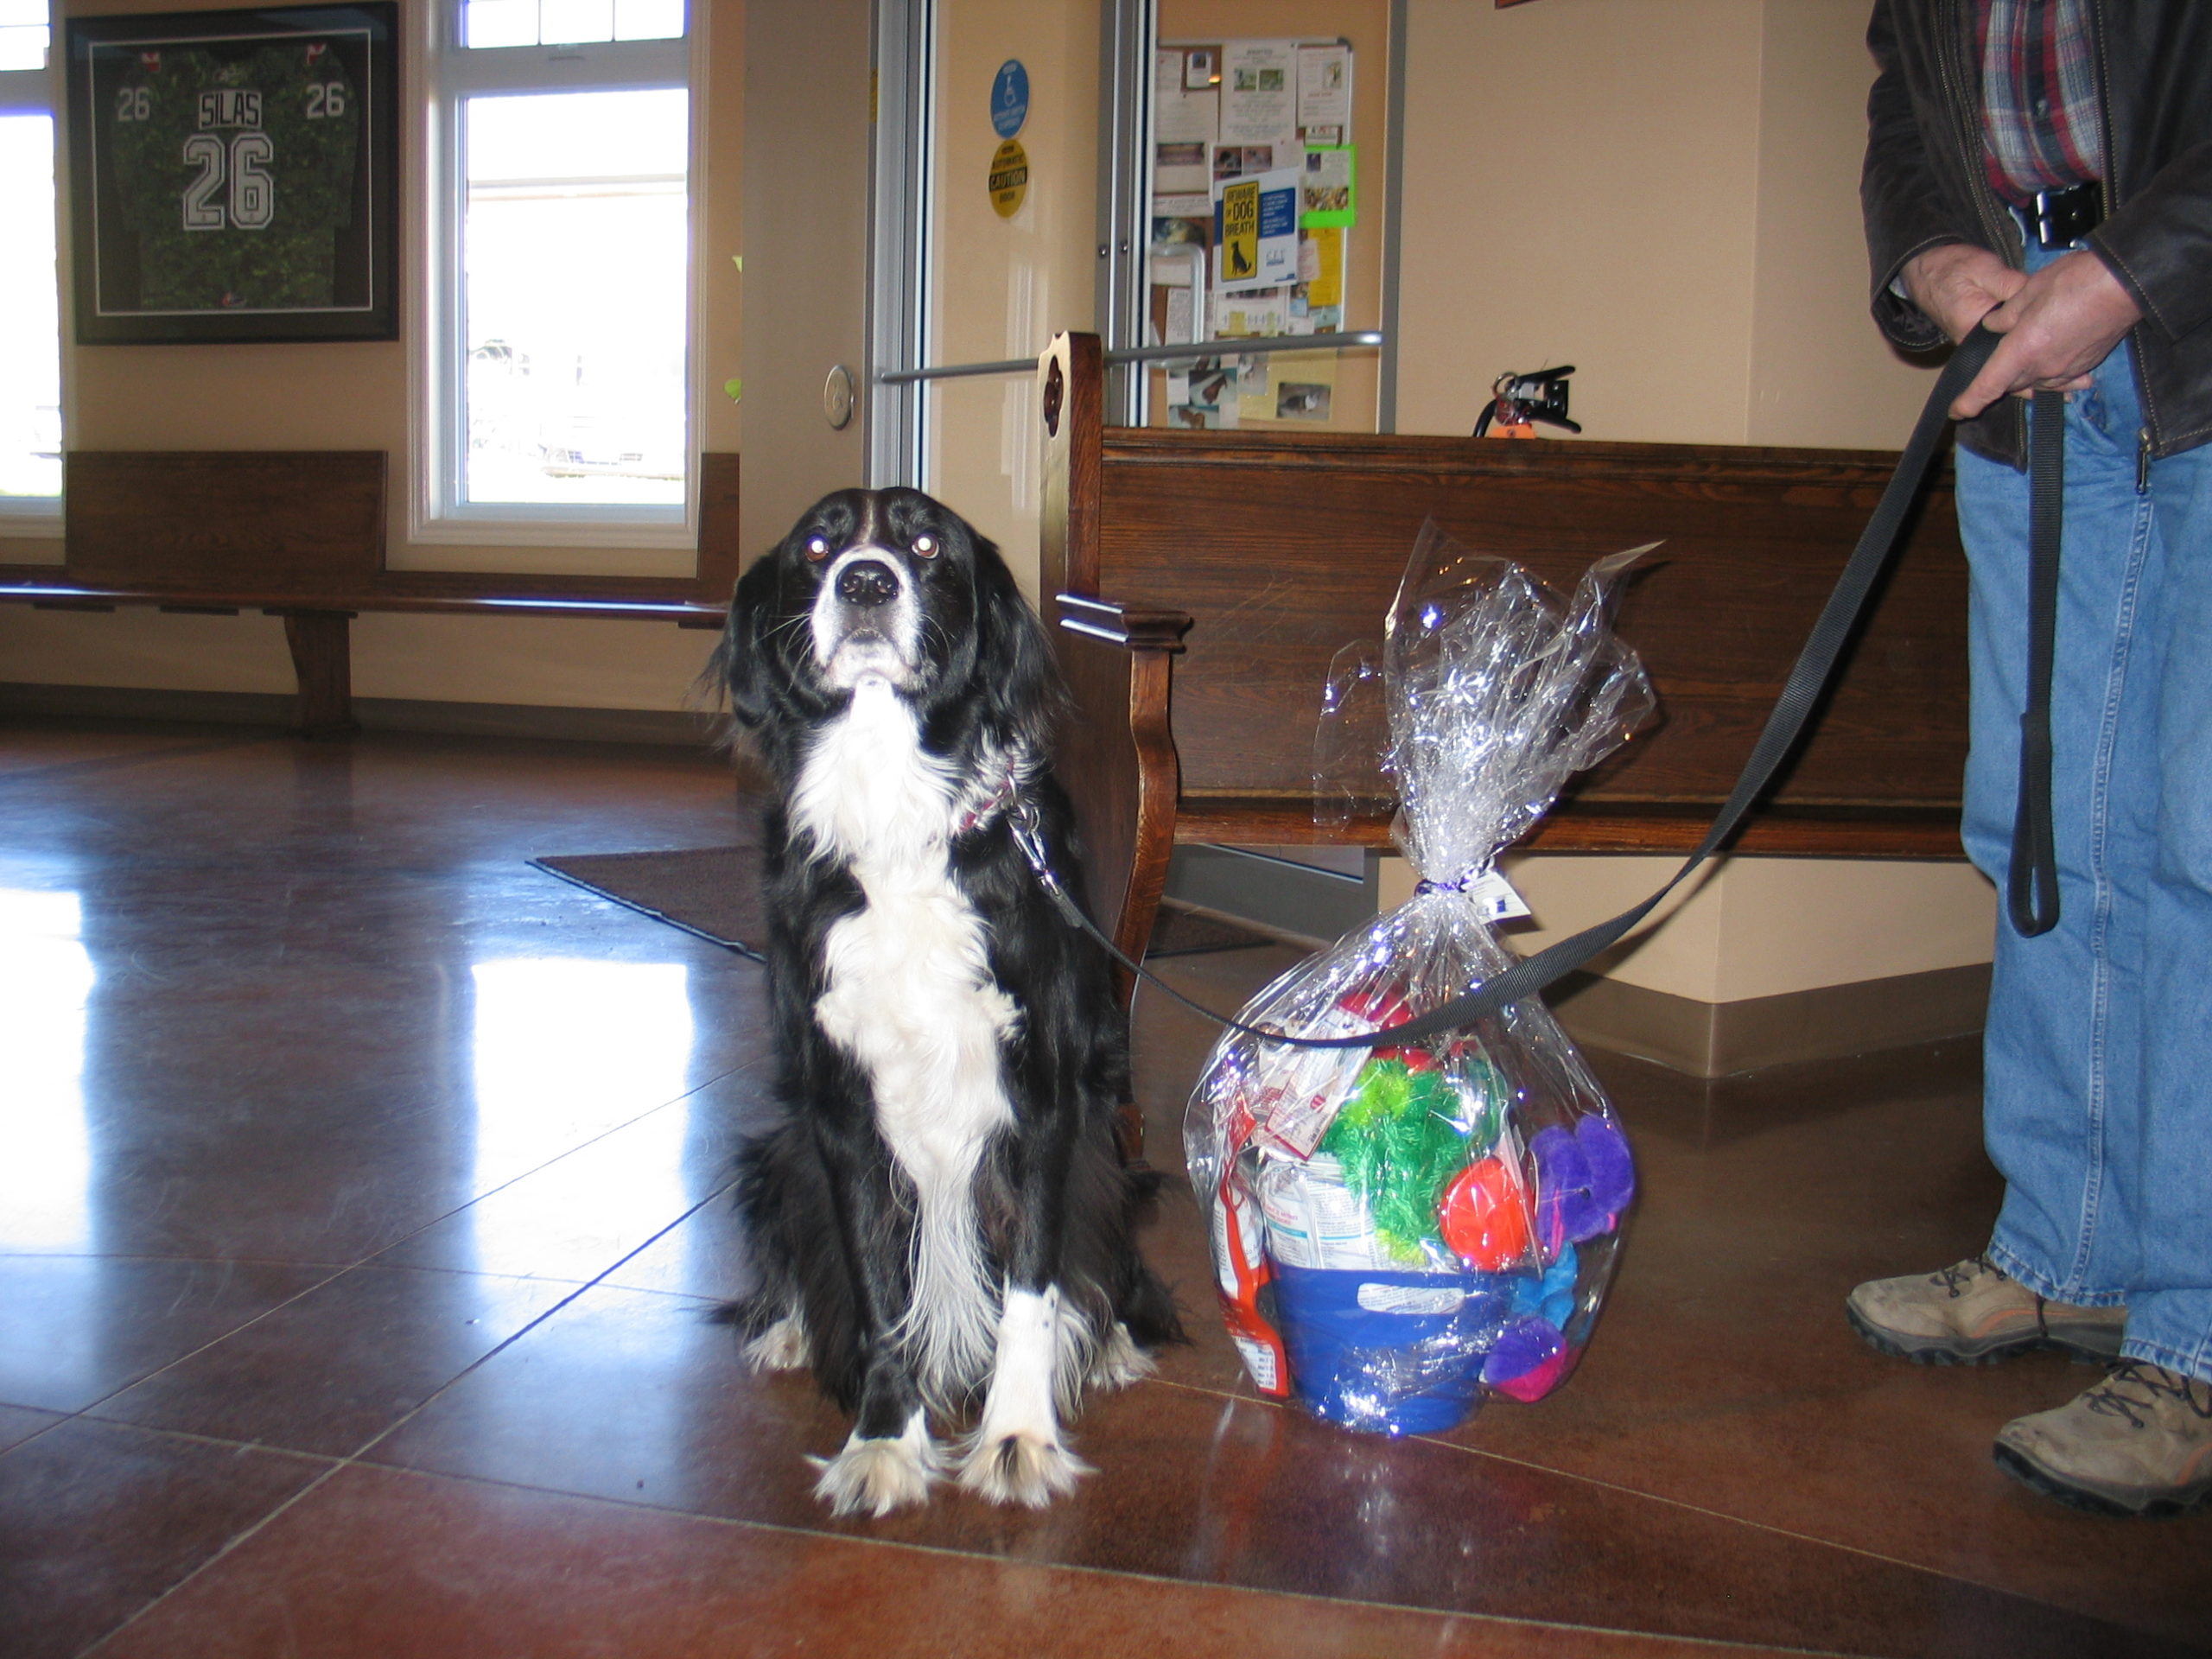 Harry the dog with a gift basket from the farley foundation fundraiser